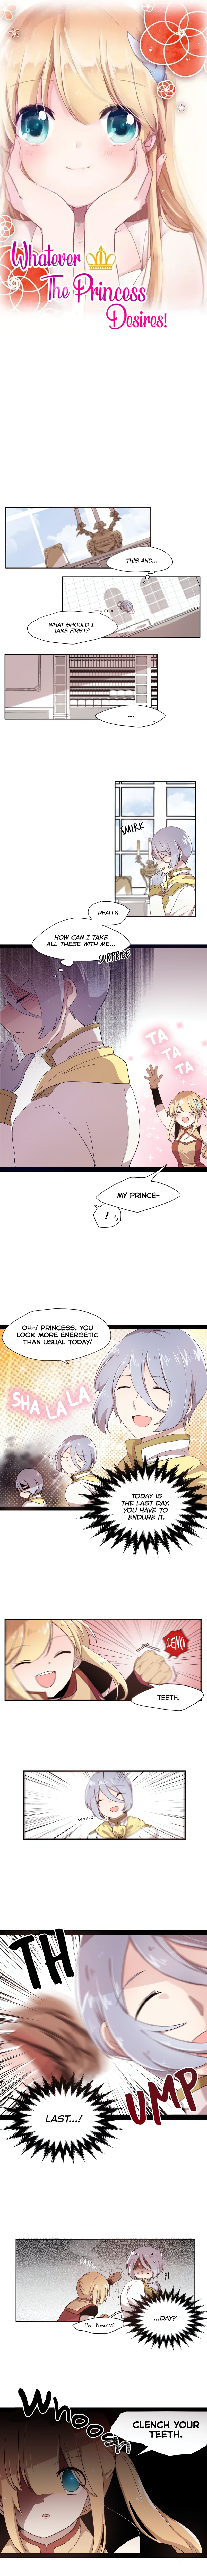 Whatever the Princess Desires! chapter 5